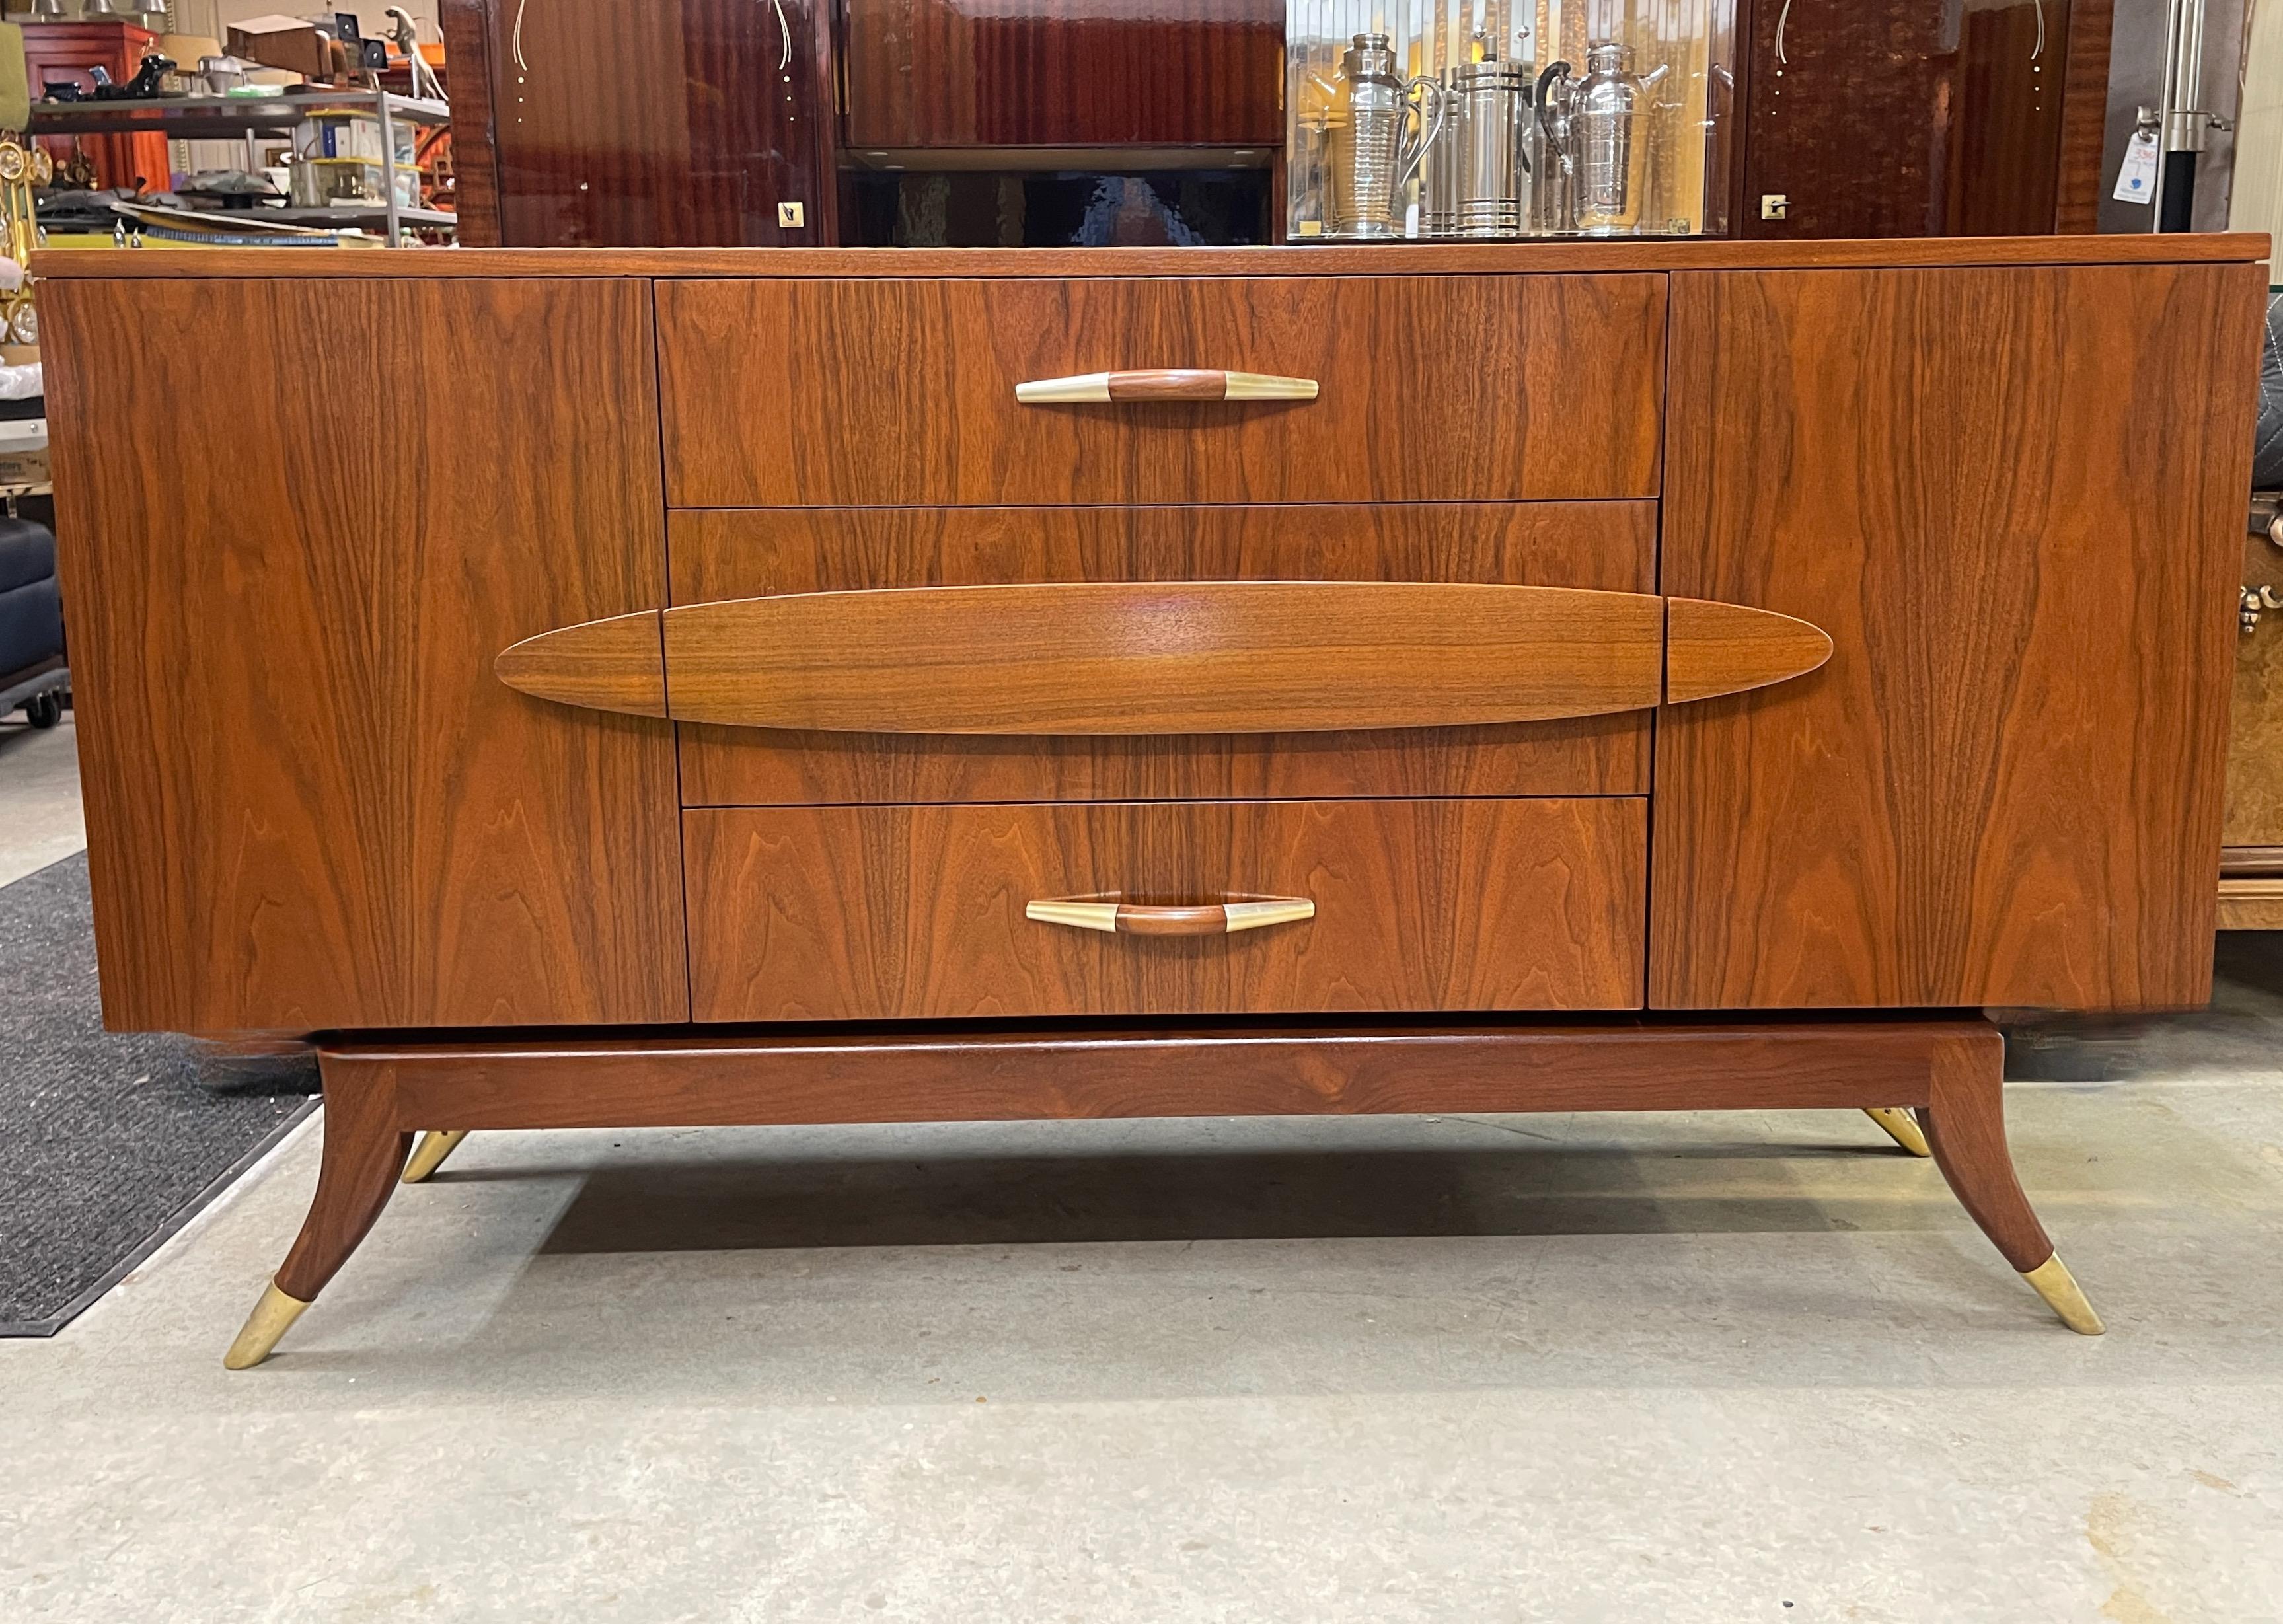 Walnut credenza custom made in 1954 by the Cambridge, MA workshop of F & G Handmade Furniture lead by Adolfo Genovese. 
Rectangular case supported on four curved tapered legs with hand cast solid brass sabots. 
Intense graining and coloring.